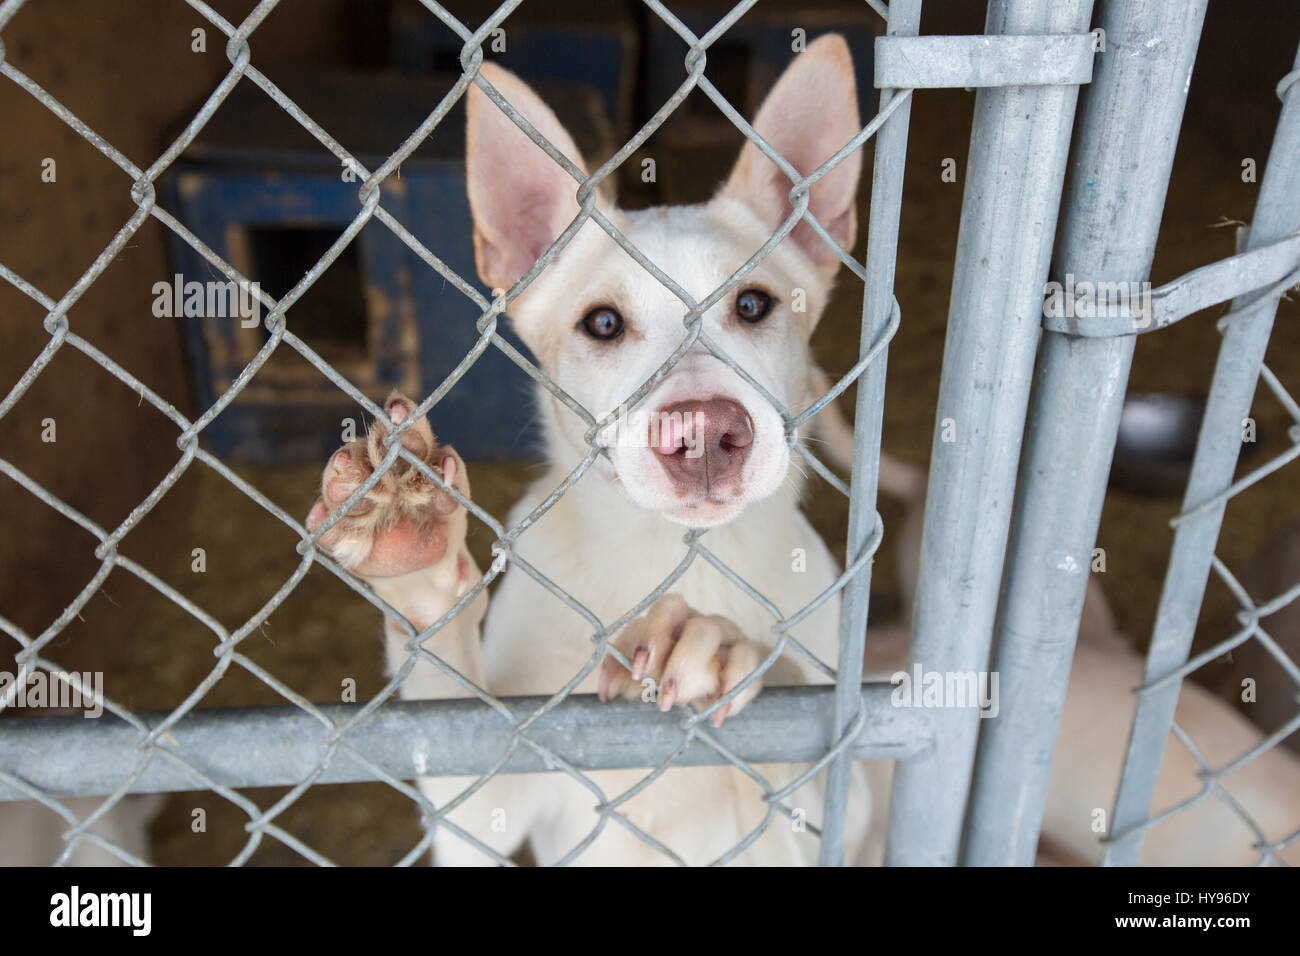 Cute white dog with big ears behind fence with one paw up looking directly at camera Stock Photo